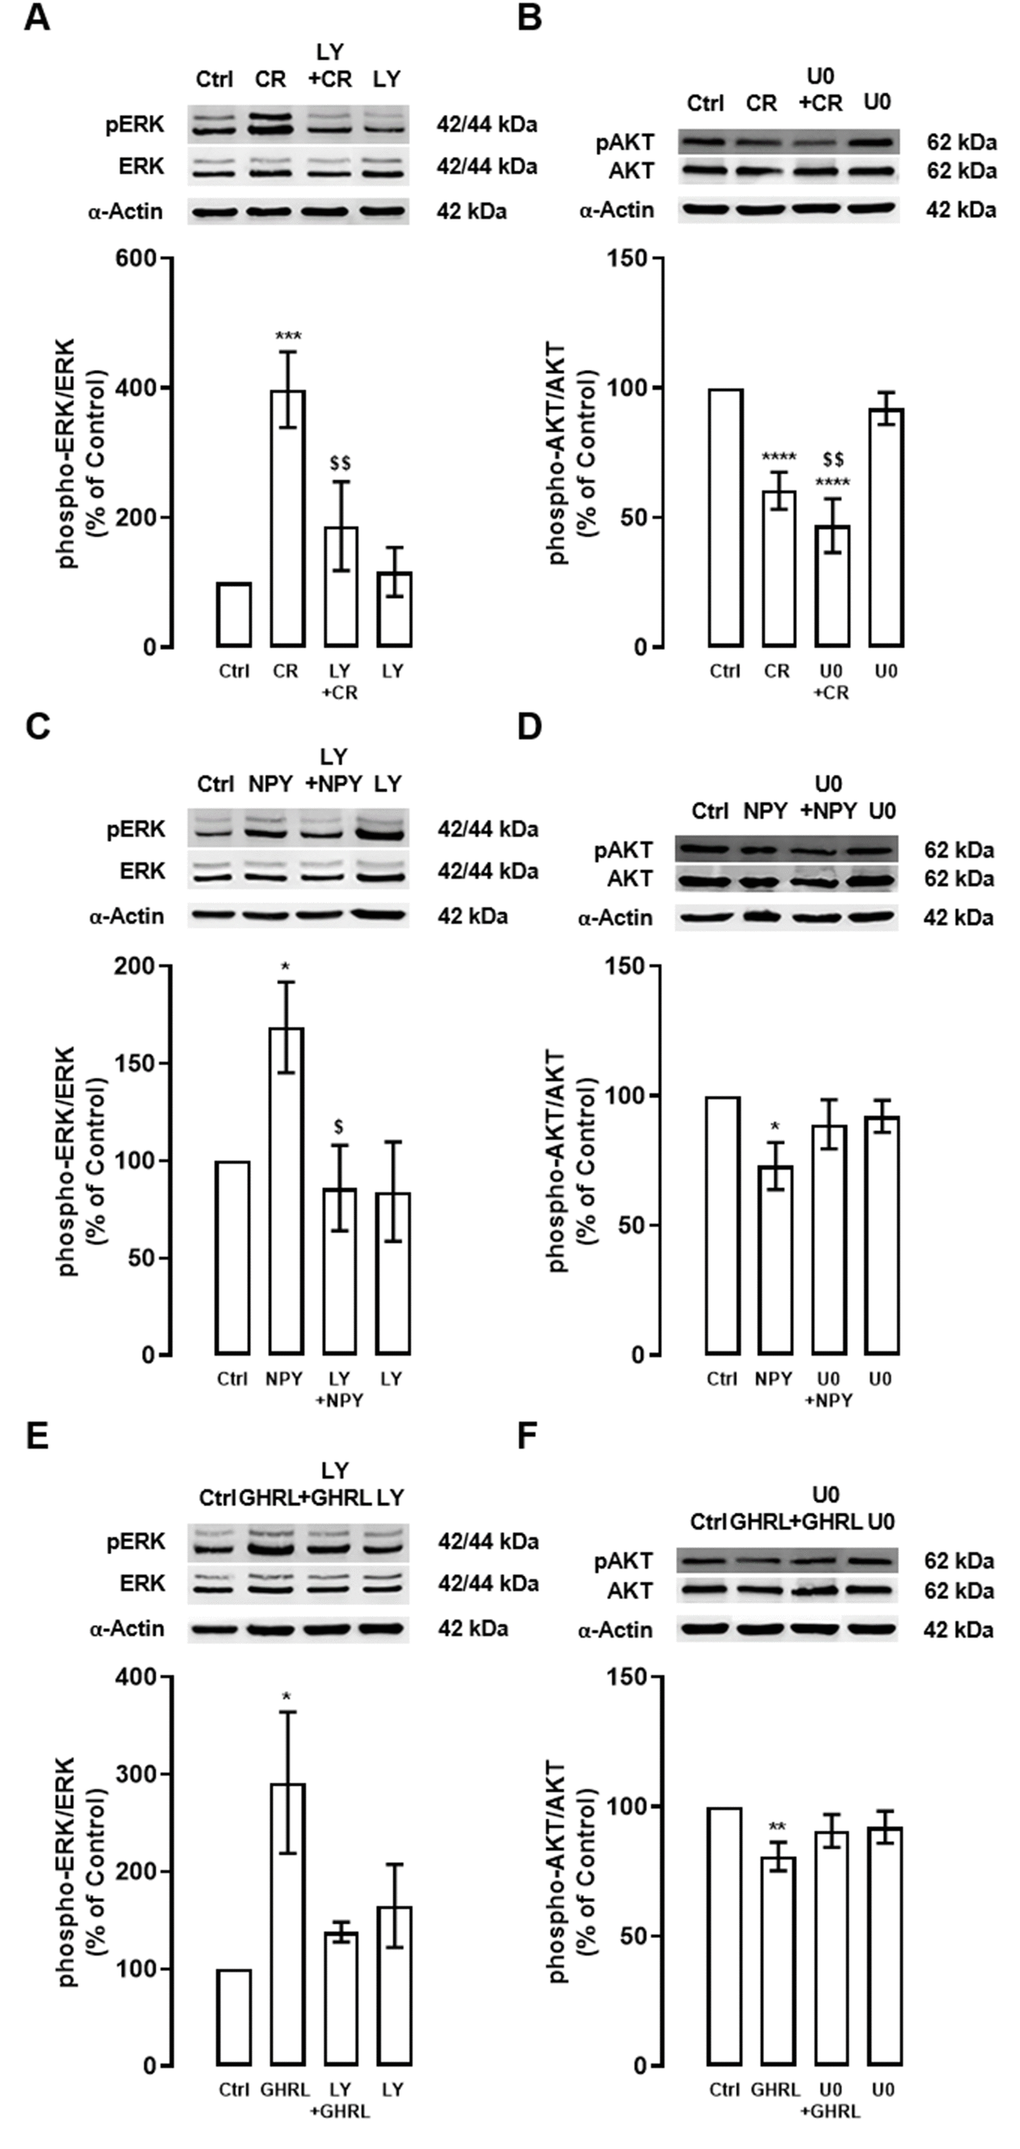 Interplay between PI3K/AKT and ERK1/2-MAPK signaling pathways under caloric restriction, NPY, and ghrelin-induced autophagy in cortical neurons. Primary rat cortical neurons were exposed to caloric restriction mimic medium (CR) - DMEM low glucose, NPY (100 nM), or ghrelin (GHRL, 10 nM) for 6 h. Untreated cells were used as control (Ctrl). (A–F) Cells were incubated with PI3K/AKT inhibitor (LY294002 (LY), 1 μM) or ERK1/2-MAPK inhibitor (U0126 (U0), 1 μM), 30 min before caloric restriction, NPY, or ghrelin treatment. Whole-cell extracts were assayed, phospho-ERK (A, C, E) and phospho-AKT (B, D, F) and ERK or AKT (loading control) immunoreactivity through Western blotting analysis, as described in Materials and Methods. Representative Western blots for each protein are presented above each respective graph. The results represent the mean±SEM of, at least, four independents experiments, and are expressed as a percentage of control. *p$p$$p